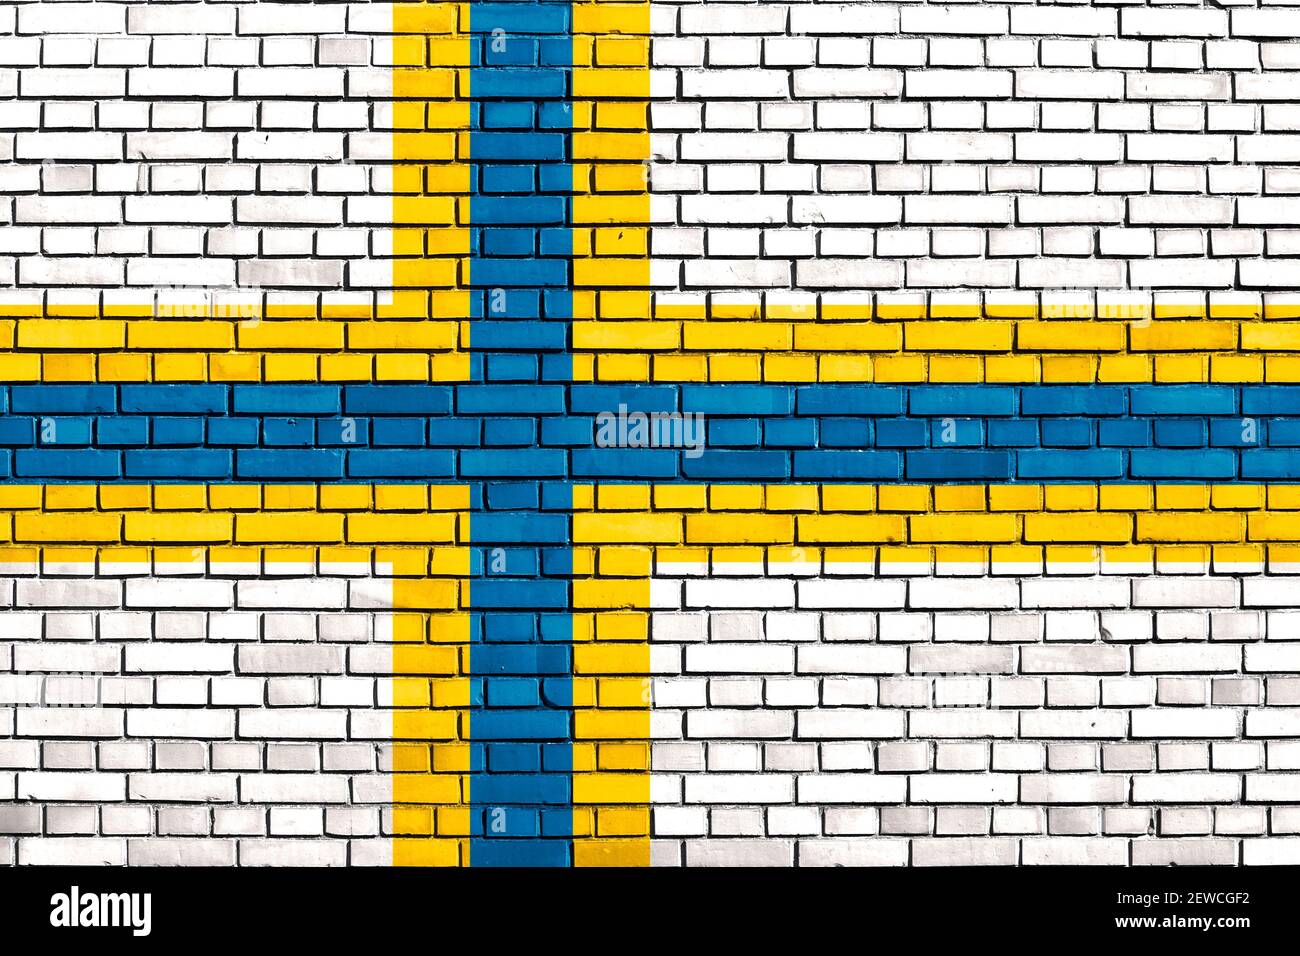 flag of Sweden Finns painted on brick wall Stock Photo